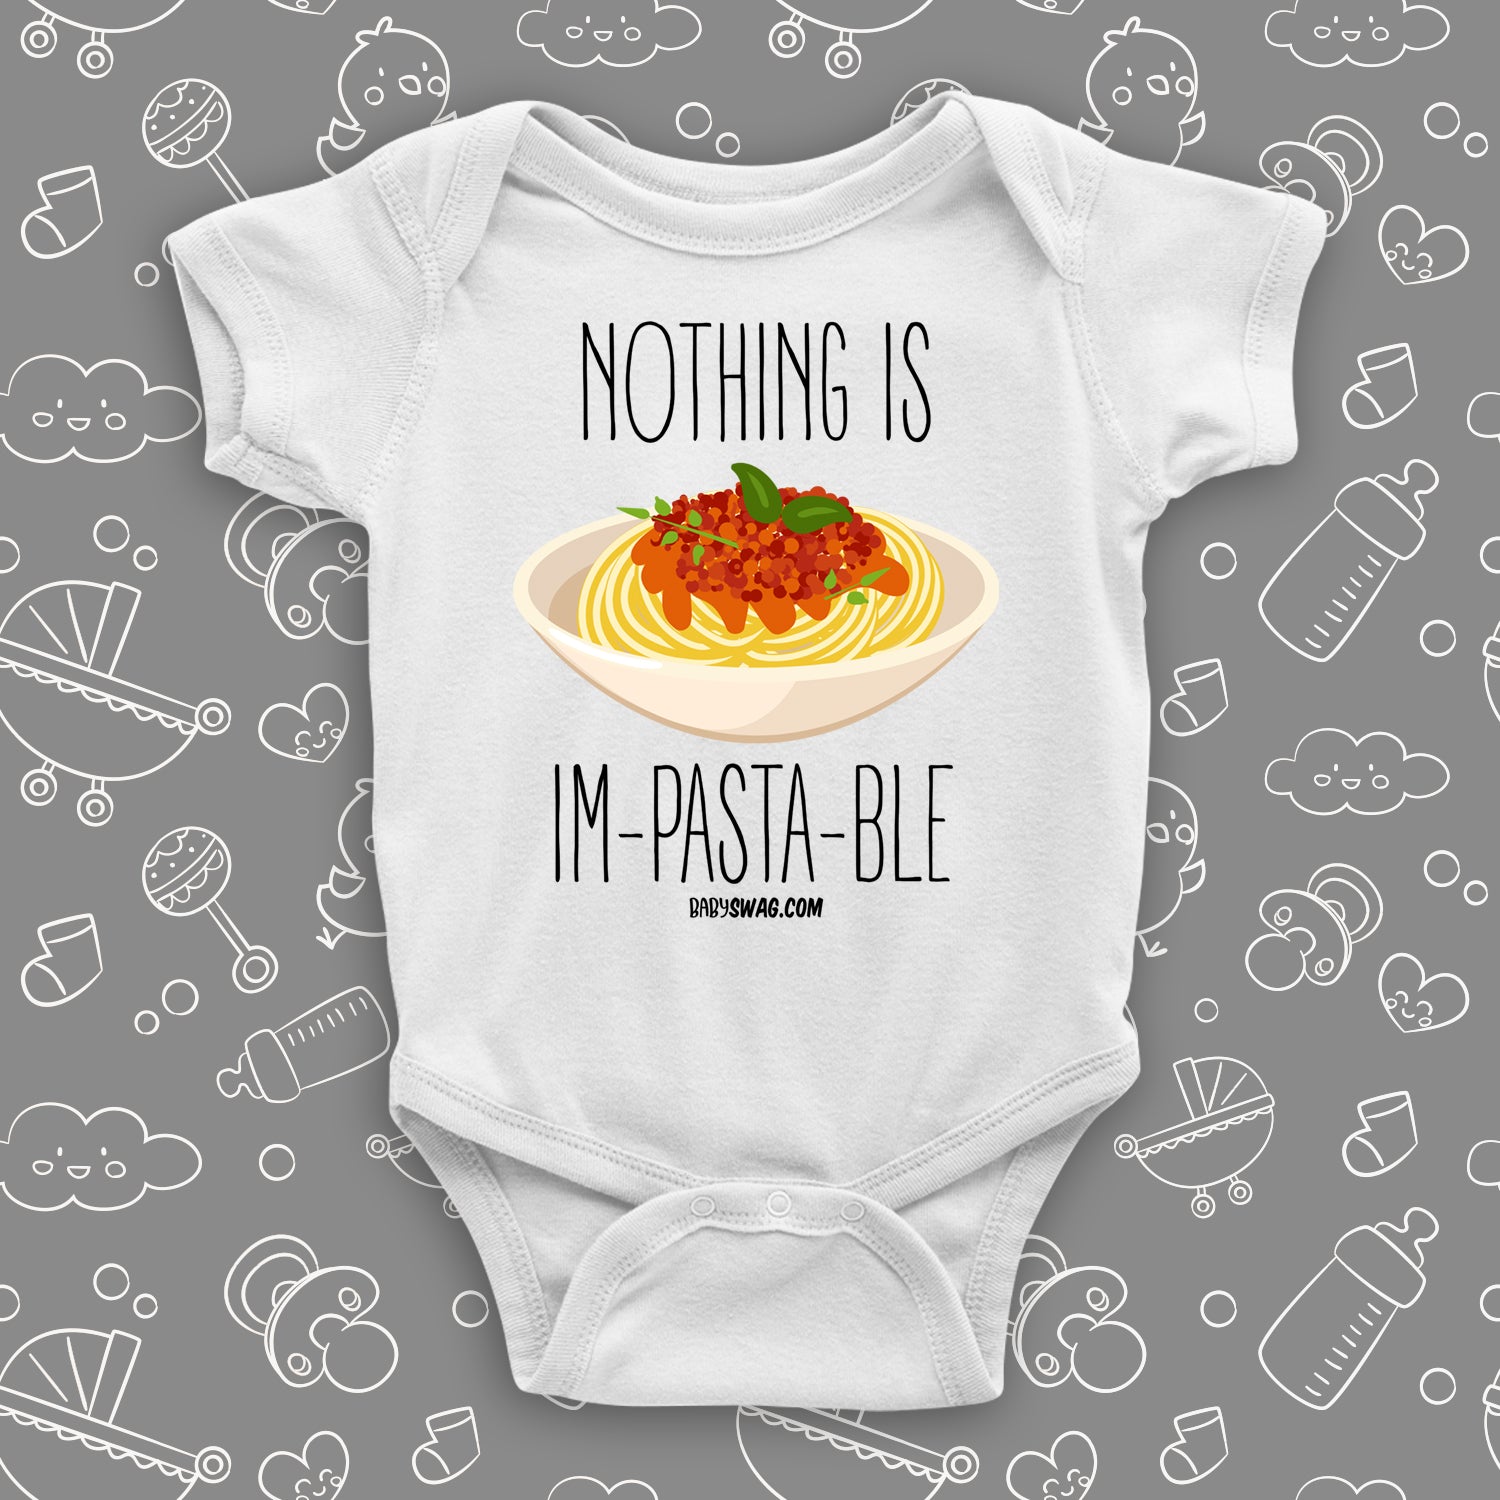 White cute baby onesie with "Nothing Is Im-pasta-ble" print and an image of pasta dish.